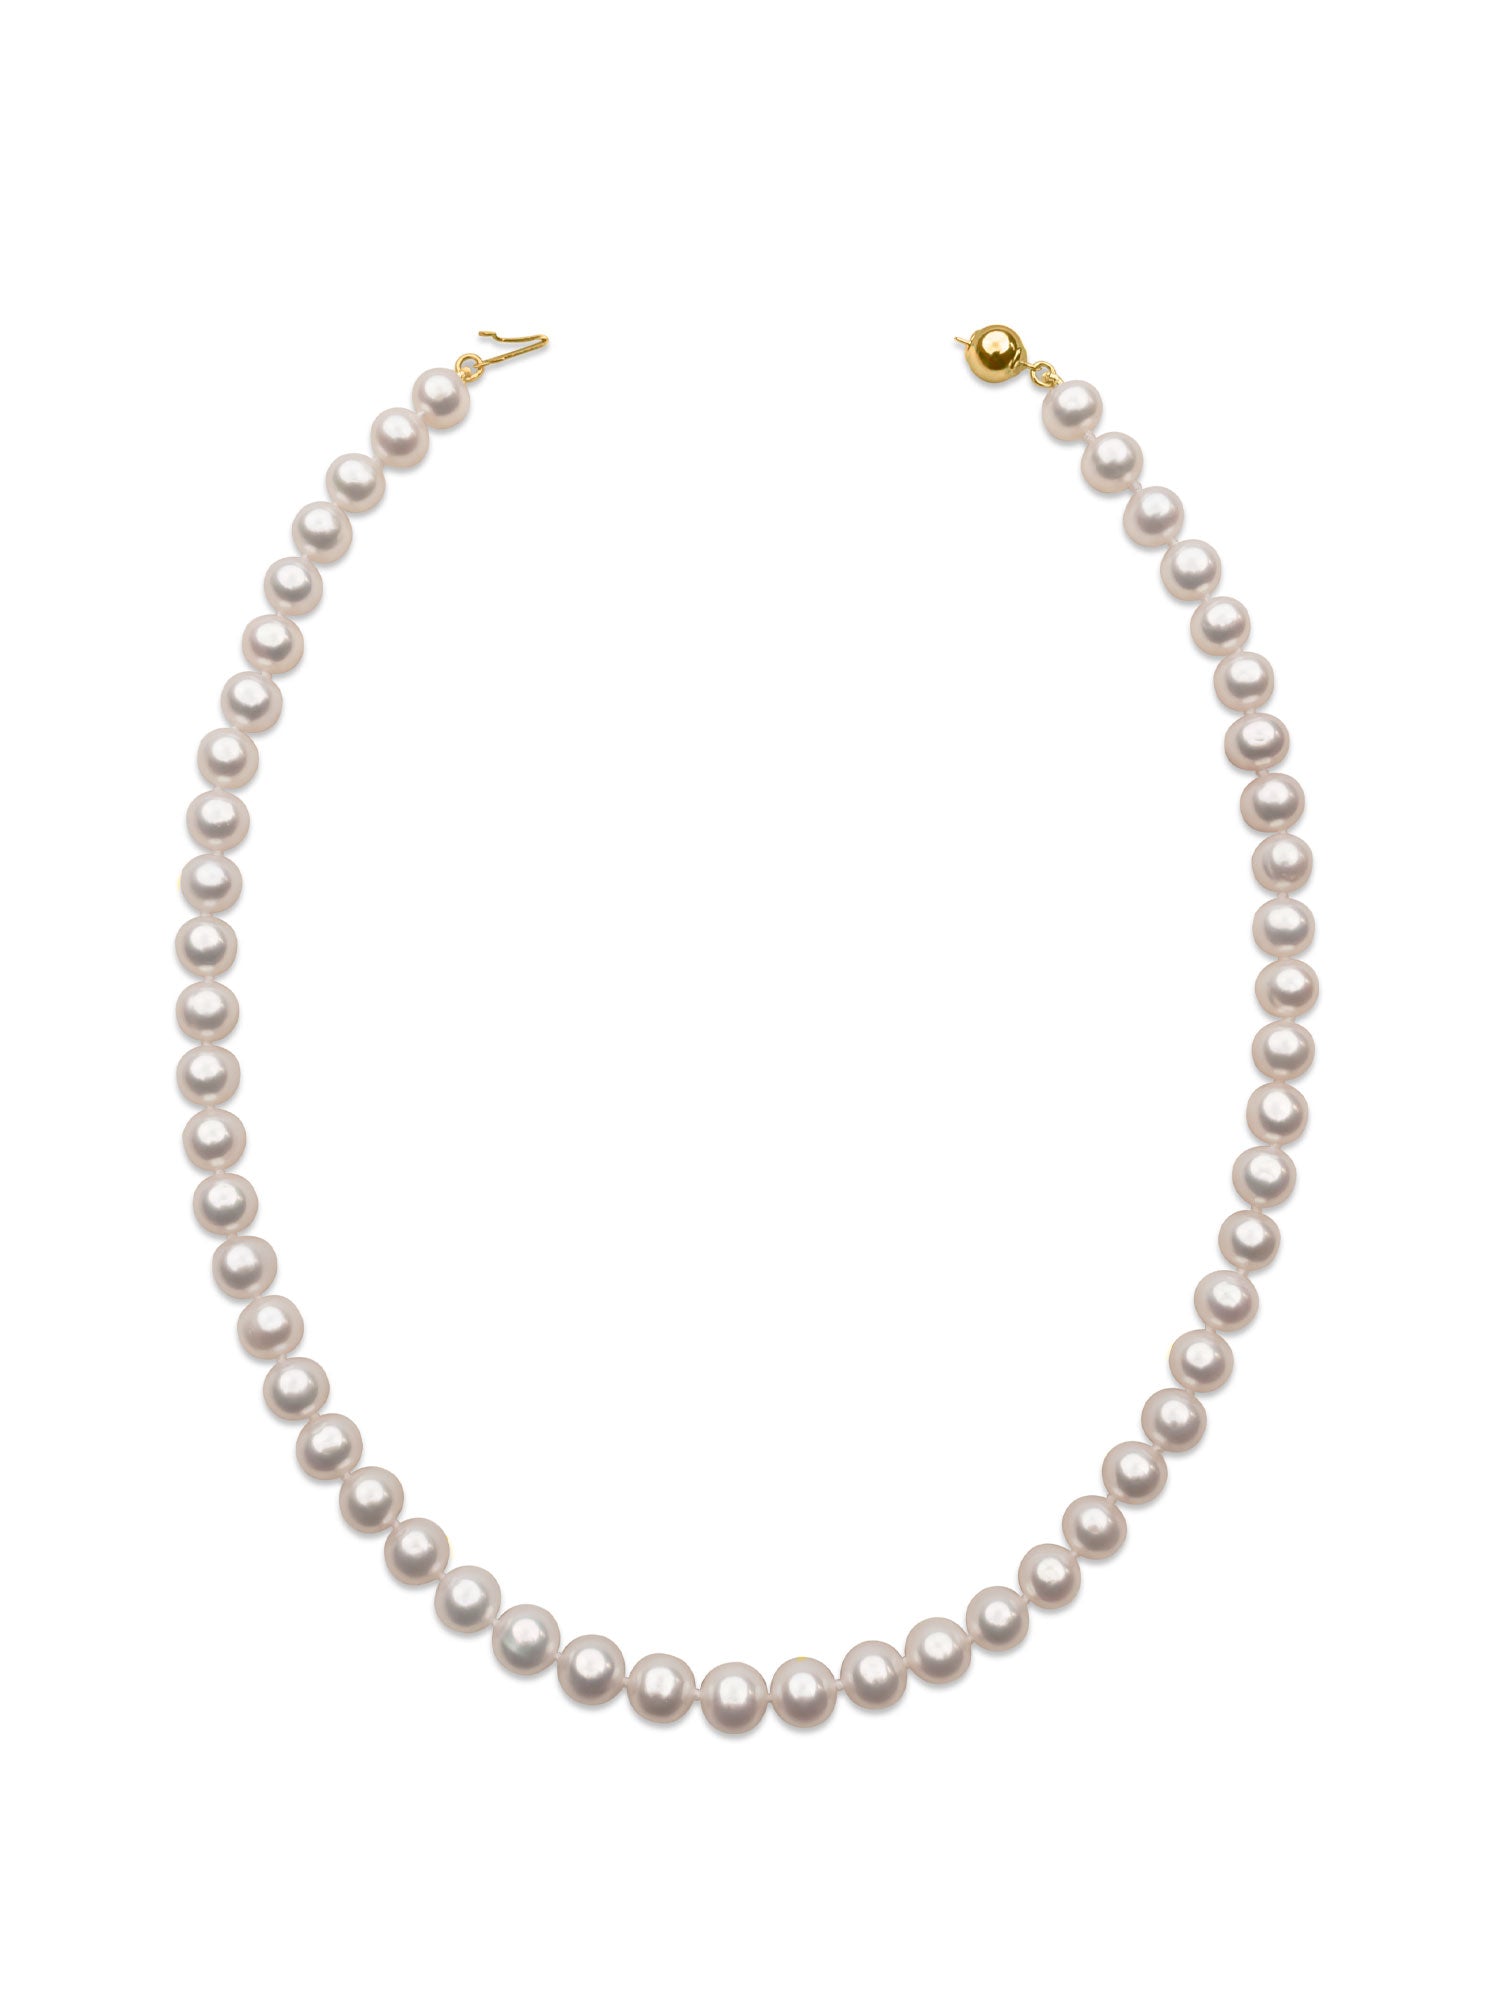 7.5-8.5mm AAA Freshwater Cultured Pearl Necklace 42cm long | 18K Gold